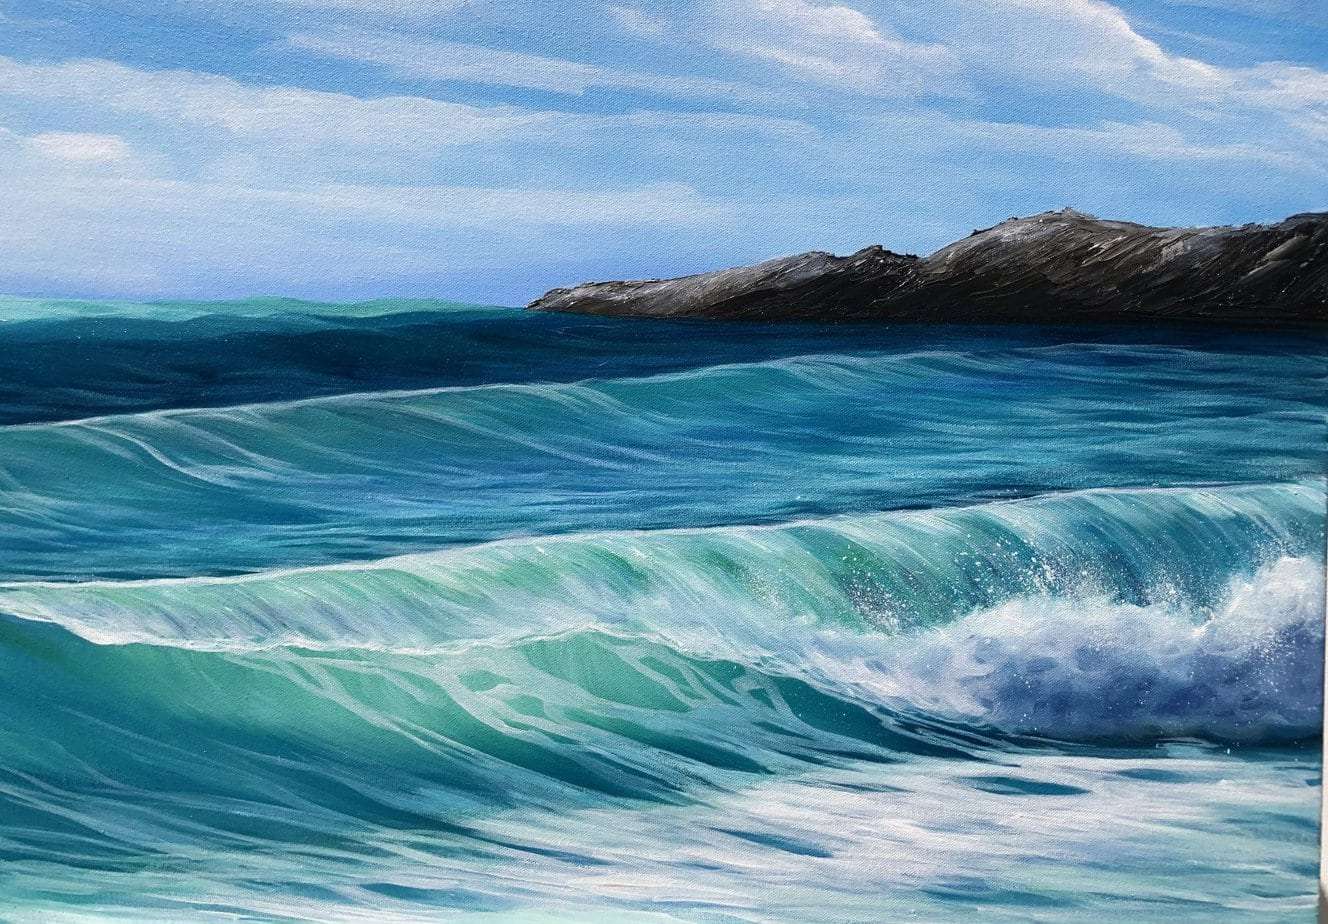 Fistral Rolling Waves close up detail of painting